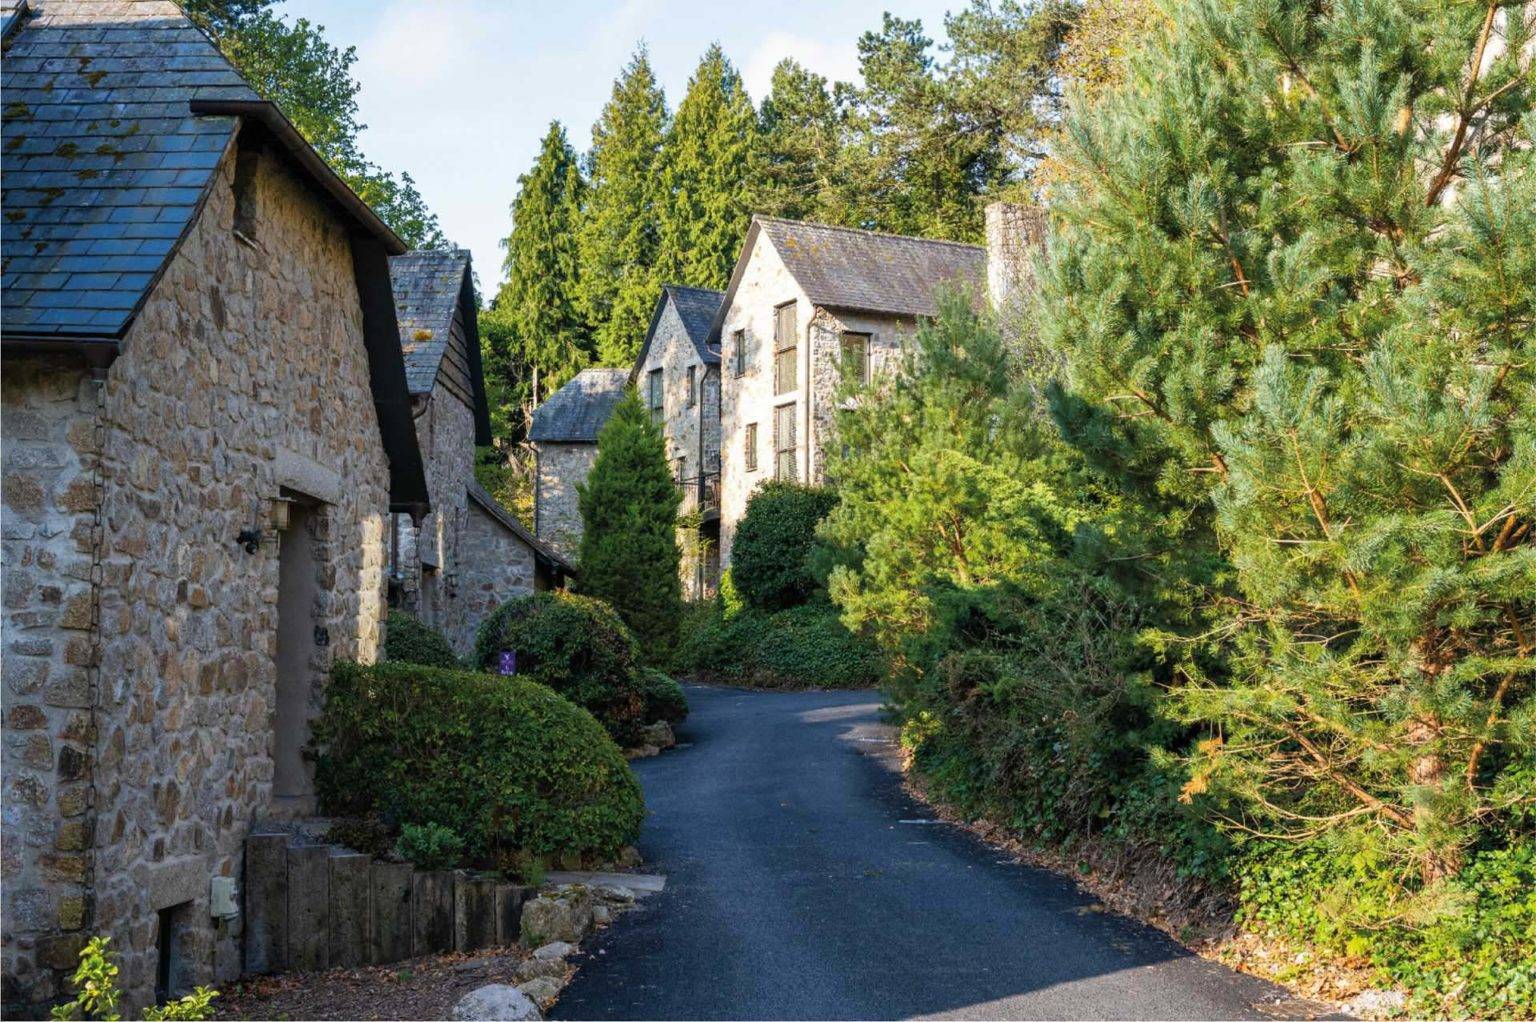 Street of stone brick Castle Lodges surrounded by evergreen trees at Bovey Castle